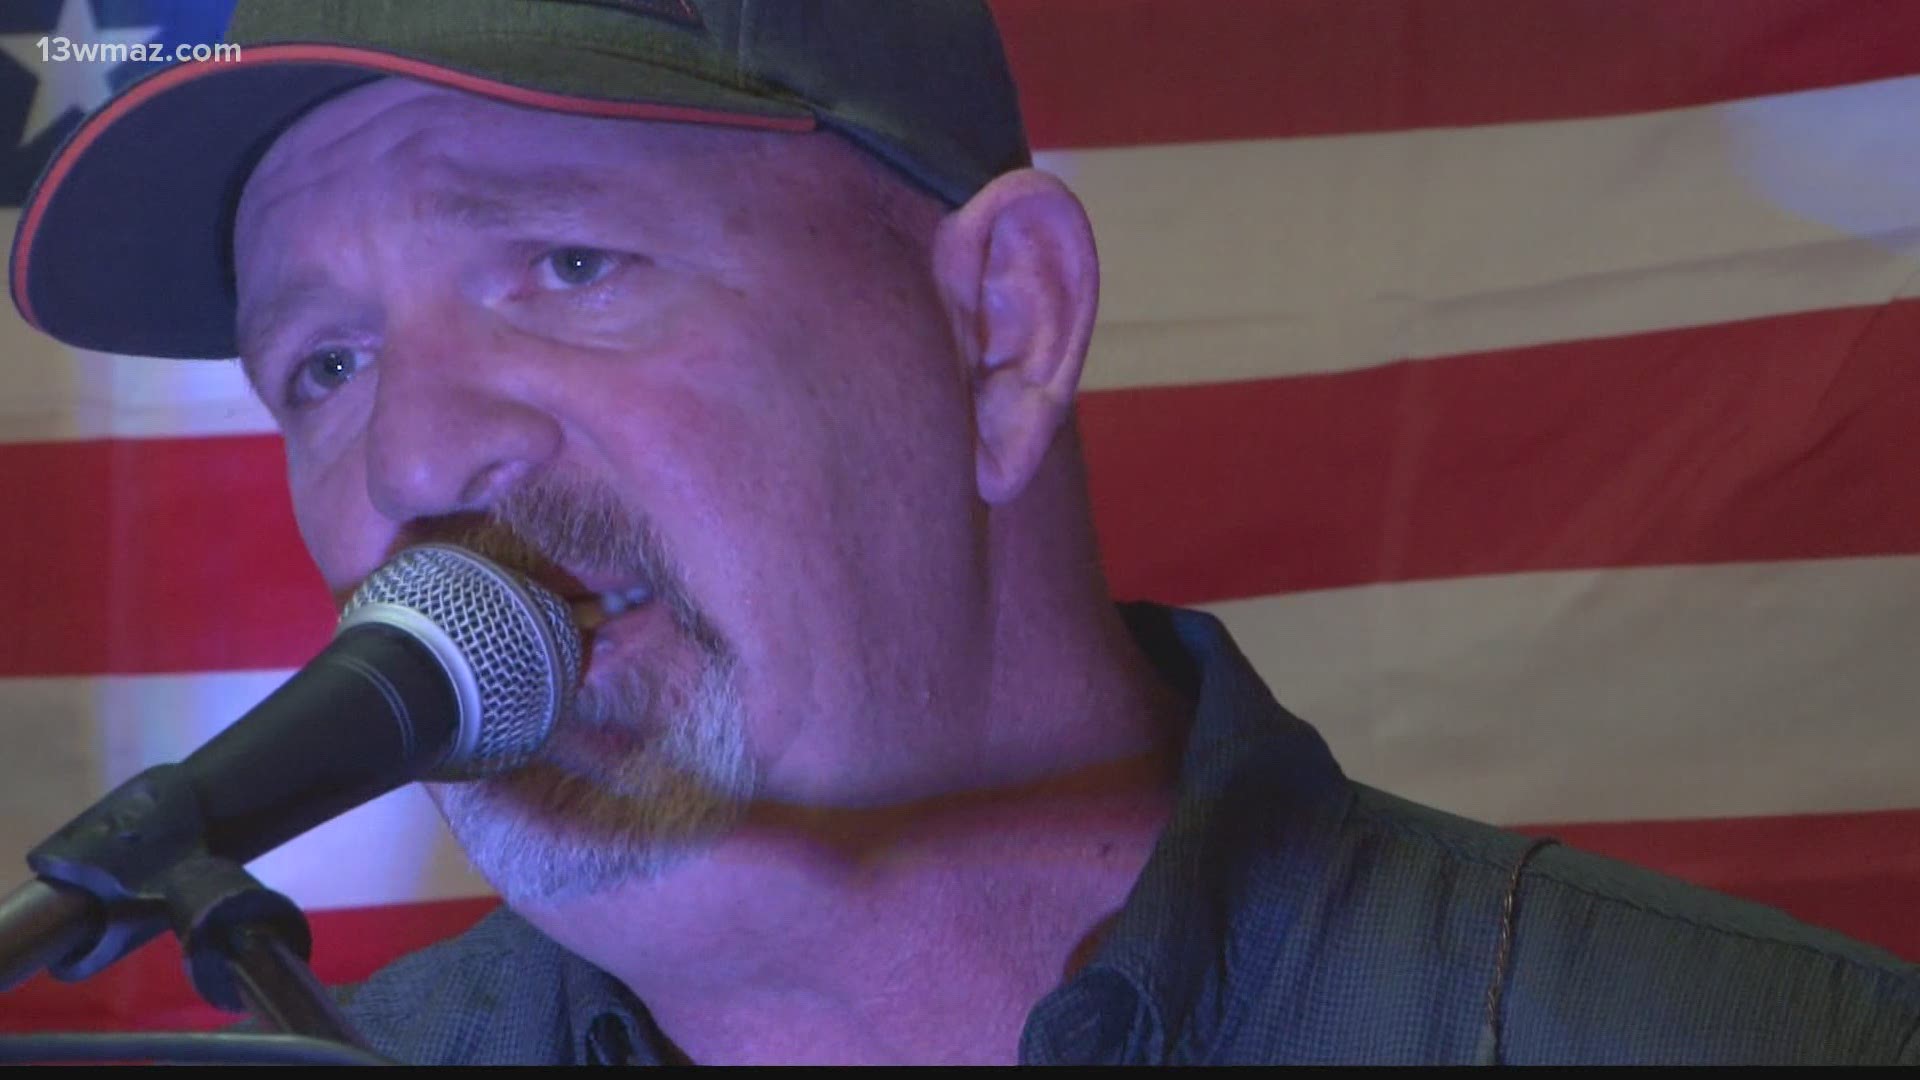 The power of a poem Vietnam veteran William Smith wrote over 30 years ago will soon be a song that he hopes can help other veterans.